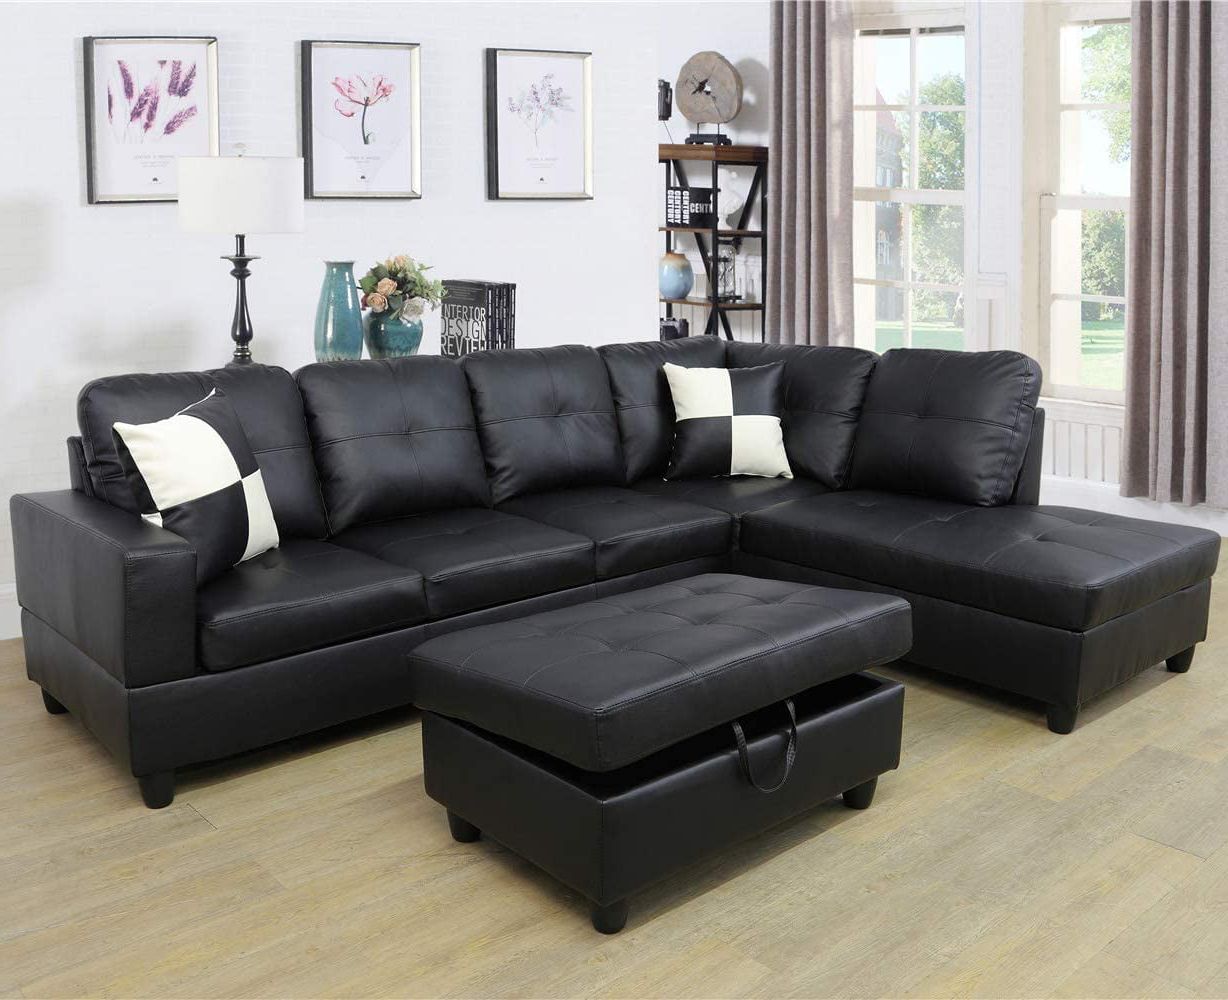 Widely Used Faux Leather Sectional Sofa Sets With Ainehome Faux Leather Sectional Set, Living Room L Shaped Modern Sofa (Photo 10 of 15)